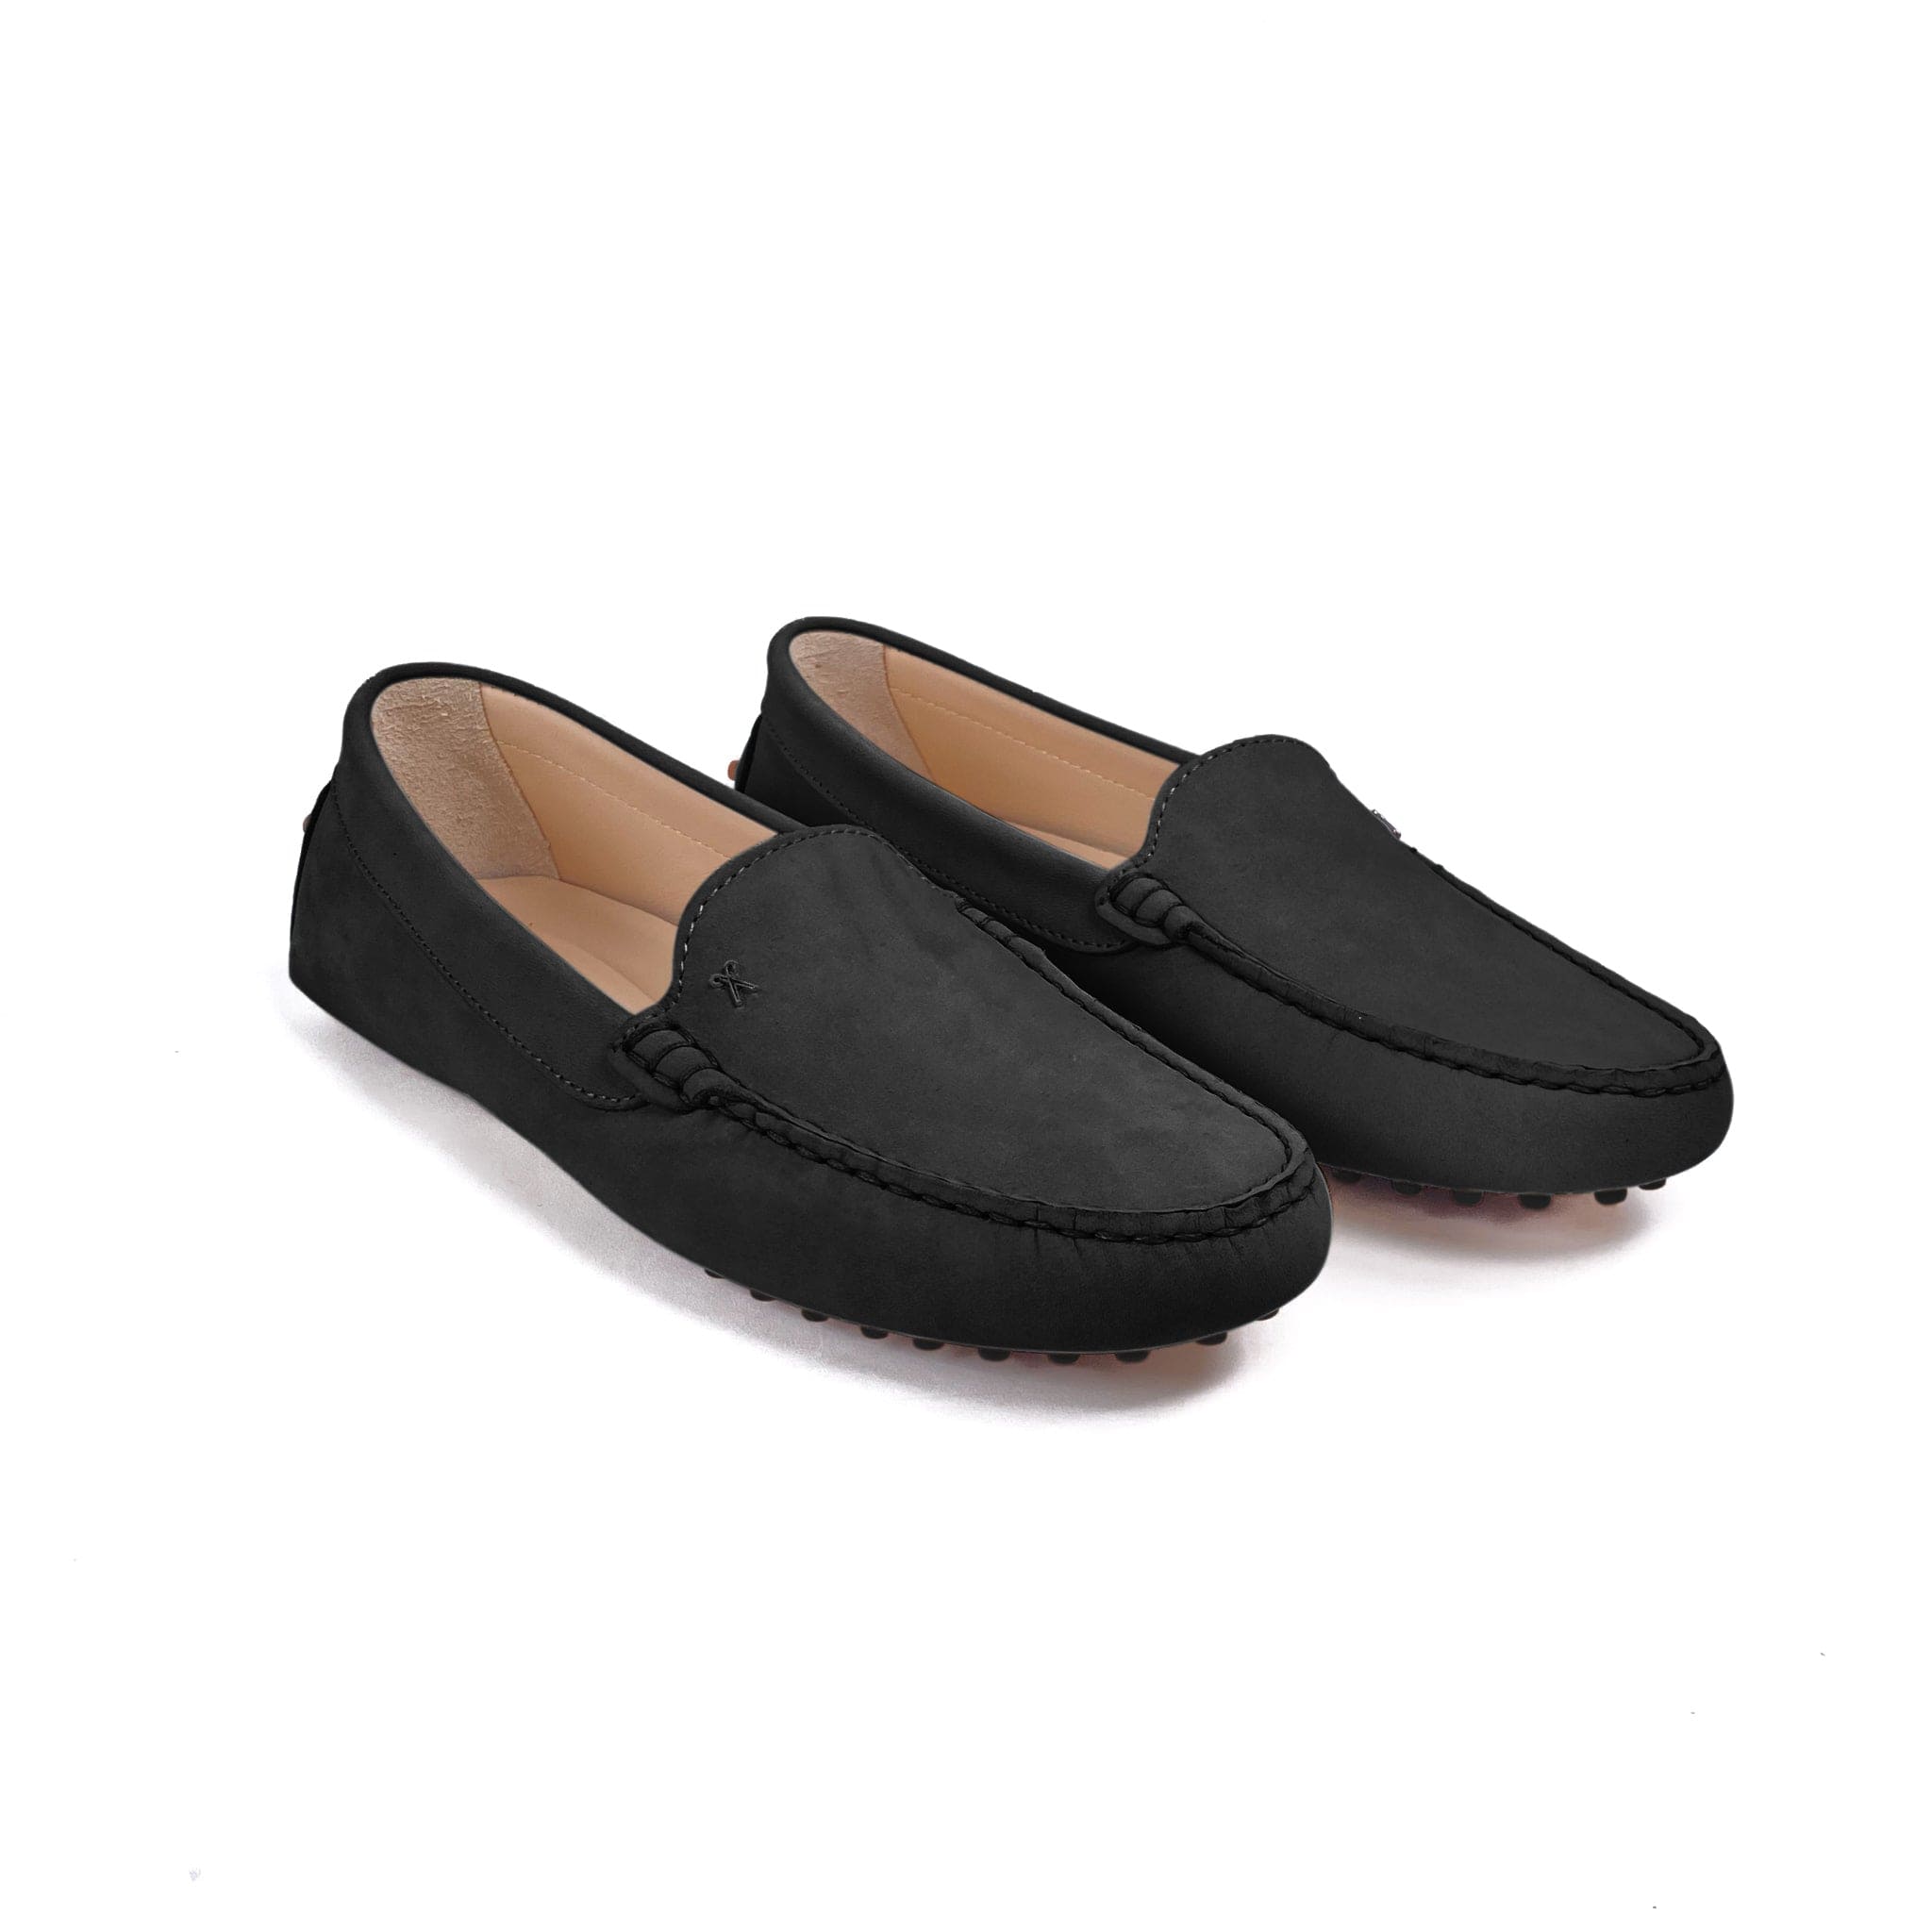 Driving shoe or moccasin in black italian nubuck leather with tan coloured calfskin lining. It has the iconic scissor on the right side of the vamp showing from the frontside on a white background